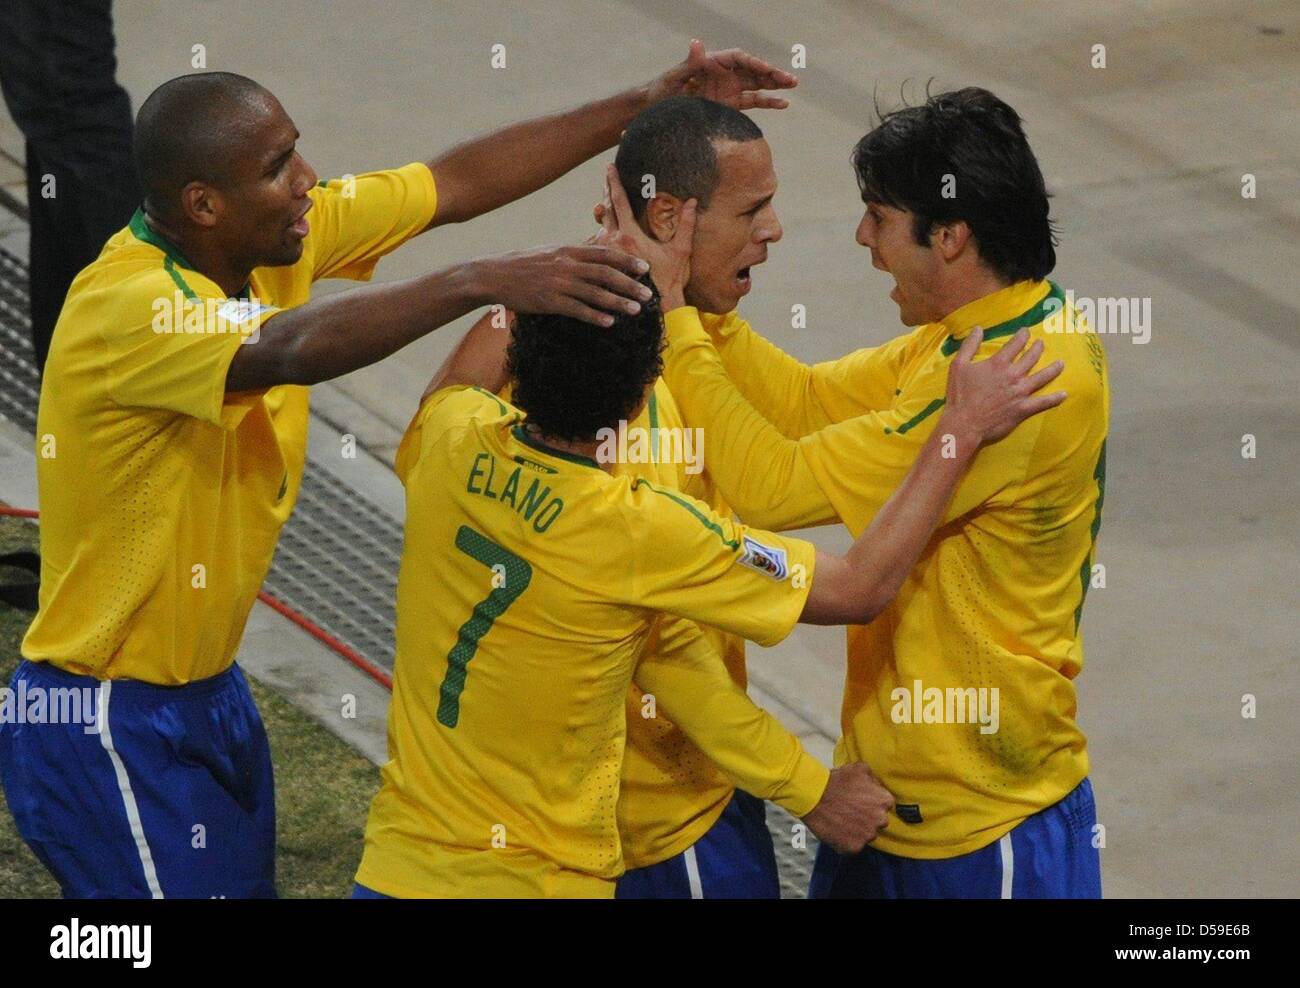 Brazil's Luis Fabiano (2nd L) celebrates scoring the 1-0 with team mates Maicon (L-R), Elano and Kaka during the 2010 FIFA World Cup group G match between Brazil and Ivory Coast at Soccer City Stadium in Johannesburg, South Africa 20 June 2010. Photo: Marcus Brandt dpa - Please refer to http://dpaq.de/FIFA-WM2010-TC Stock Photo